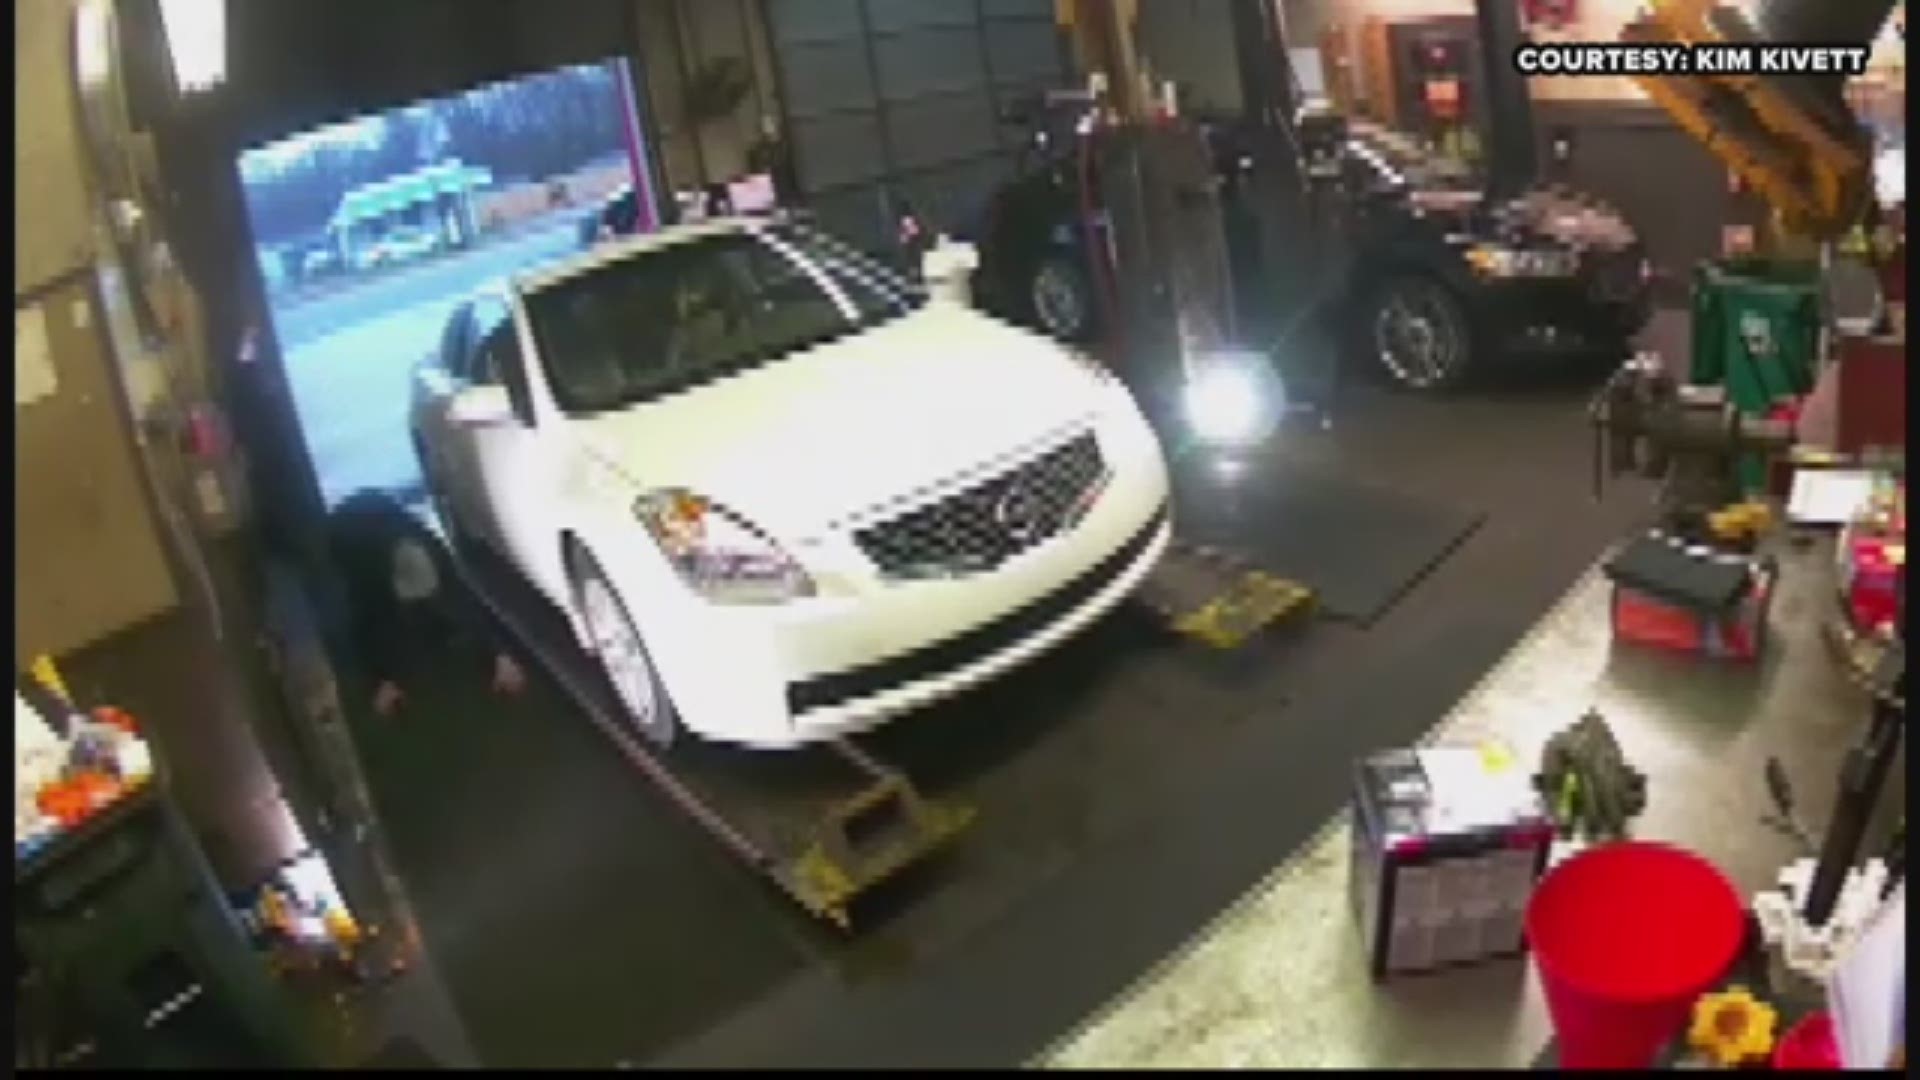 Surveillance video captured terrifying moments at Kivett Auto in Randolph County as workers run from gunshots.